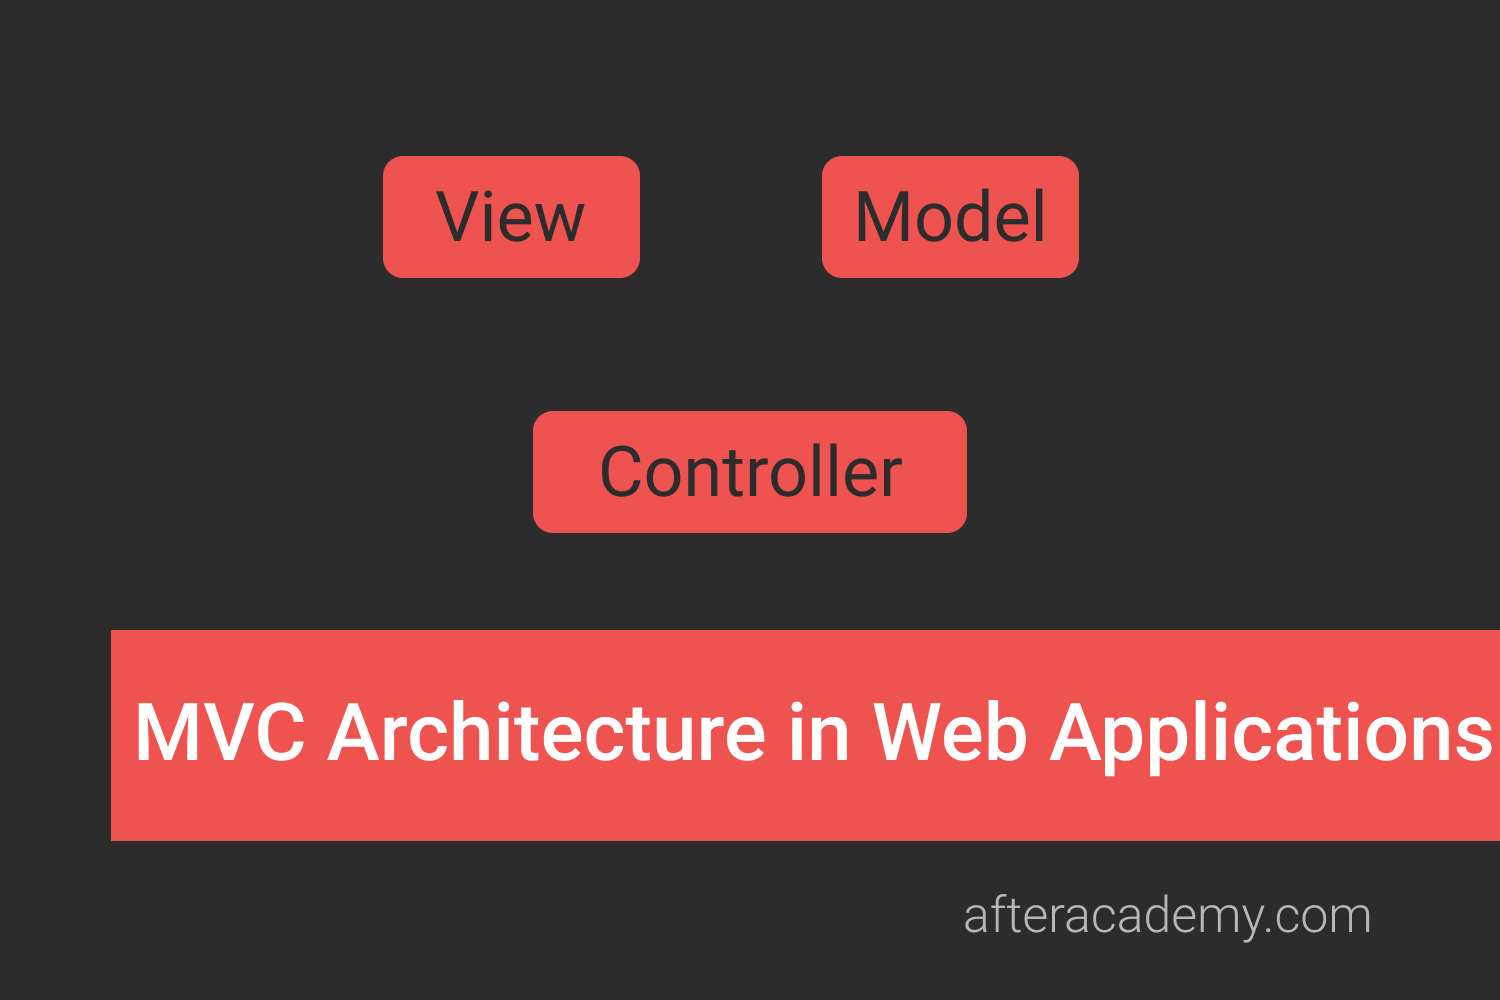 MVC Architecture in Web Applications